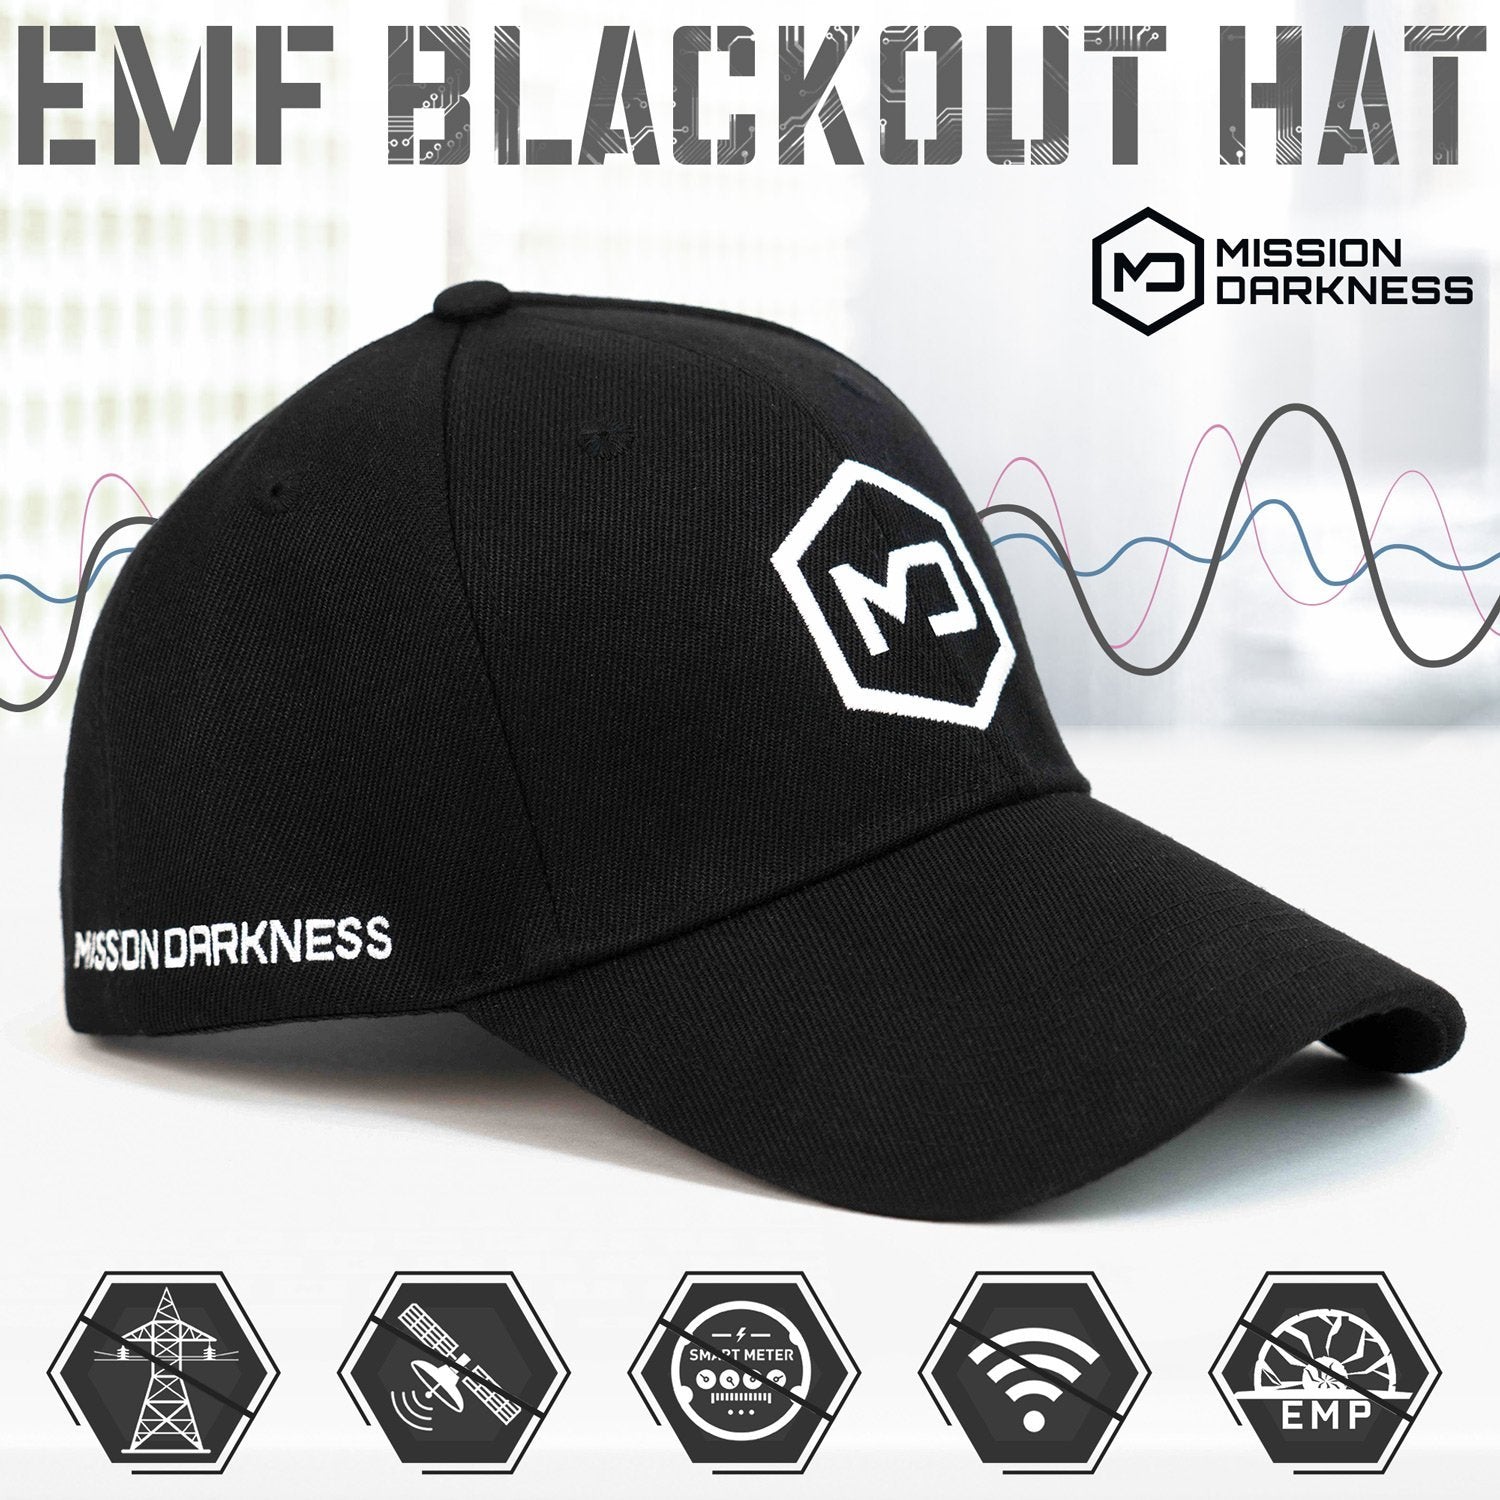 EMF Head Protection Faraday Hat from Cell & Tower Wifi Radiation